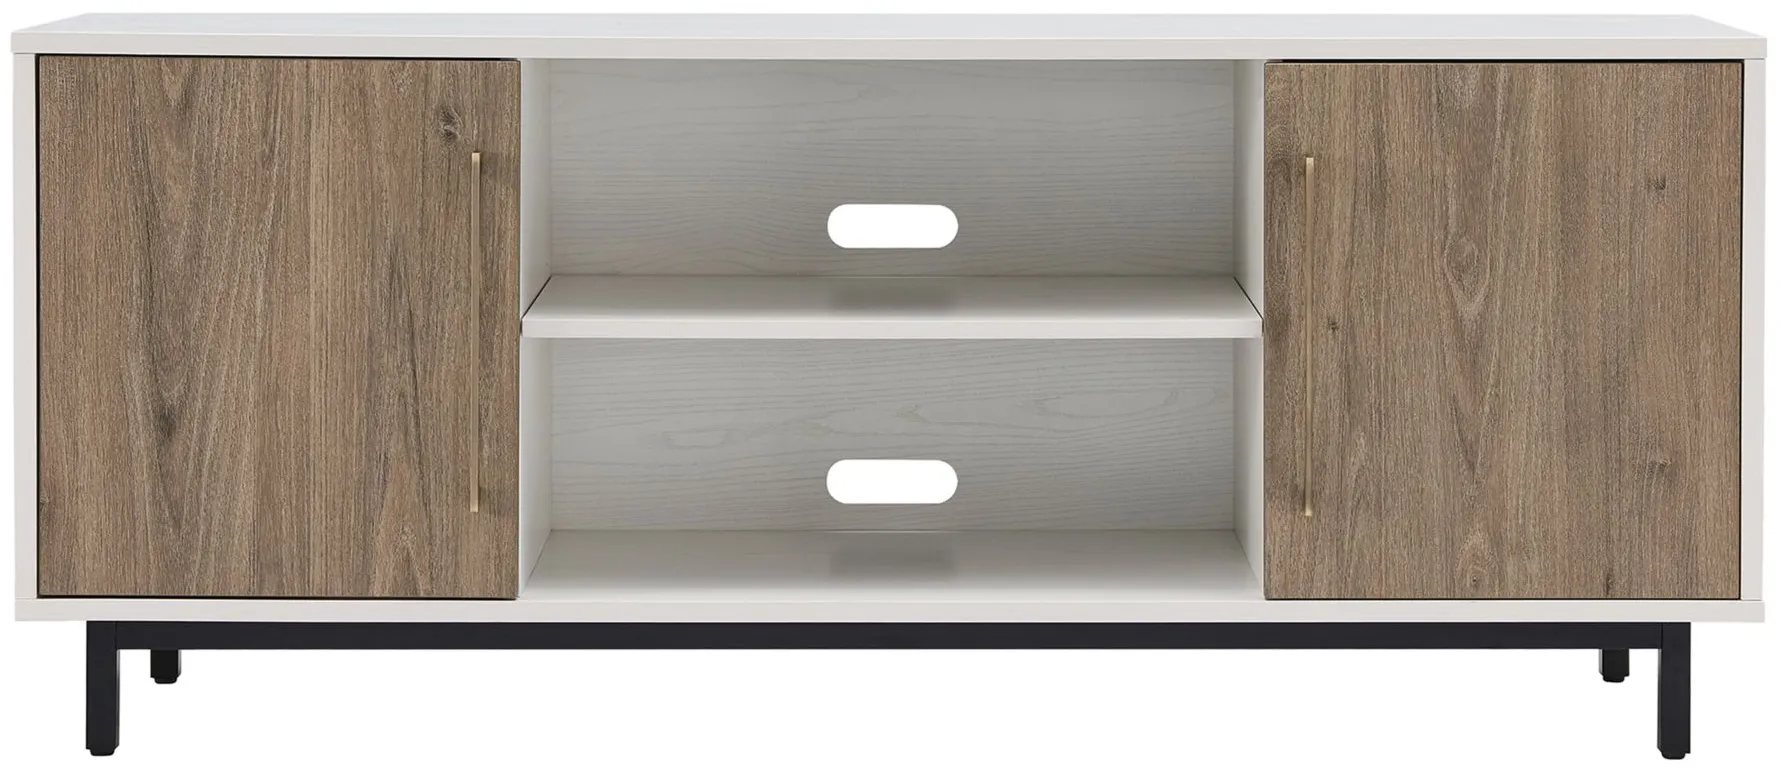 Beck TV Stand in White/Antiqued Gray Oak by Hudson & Canal